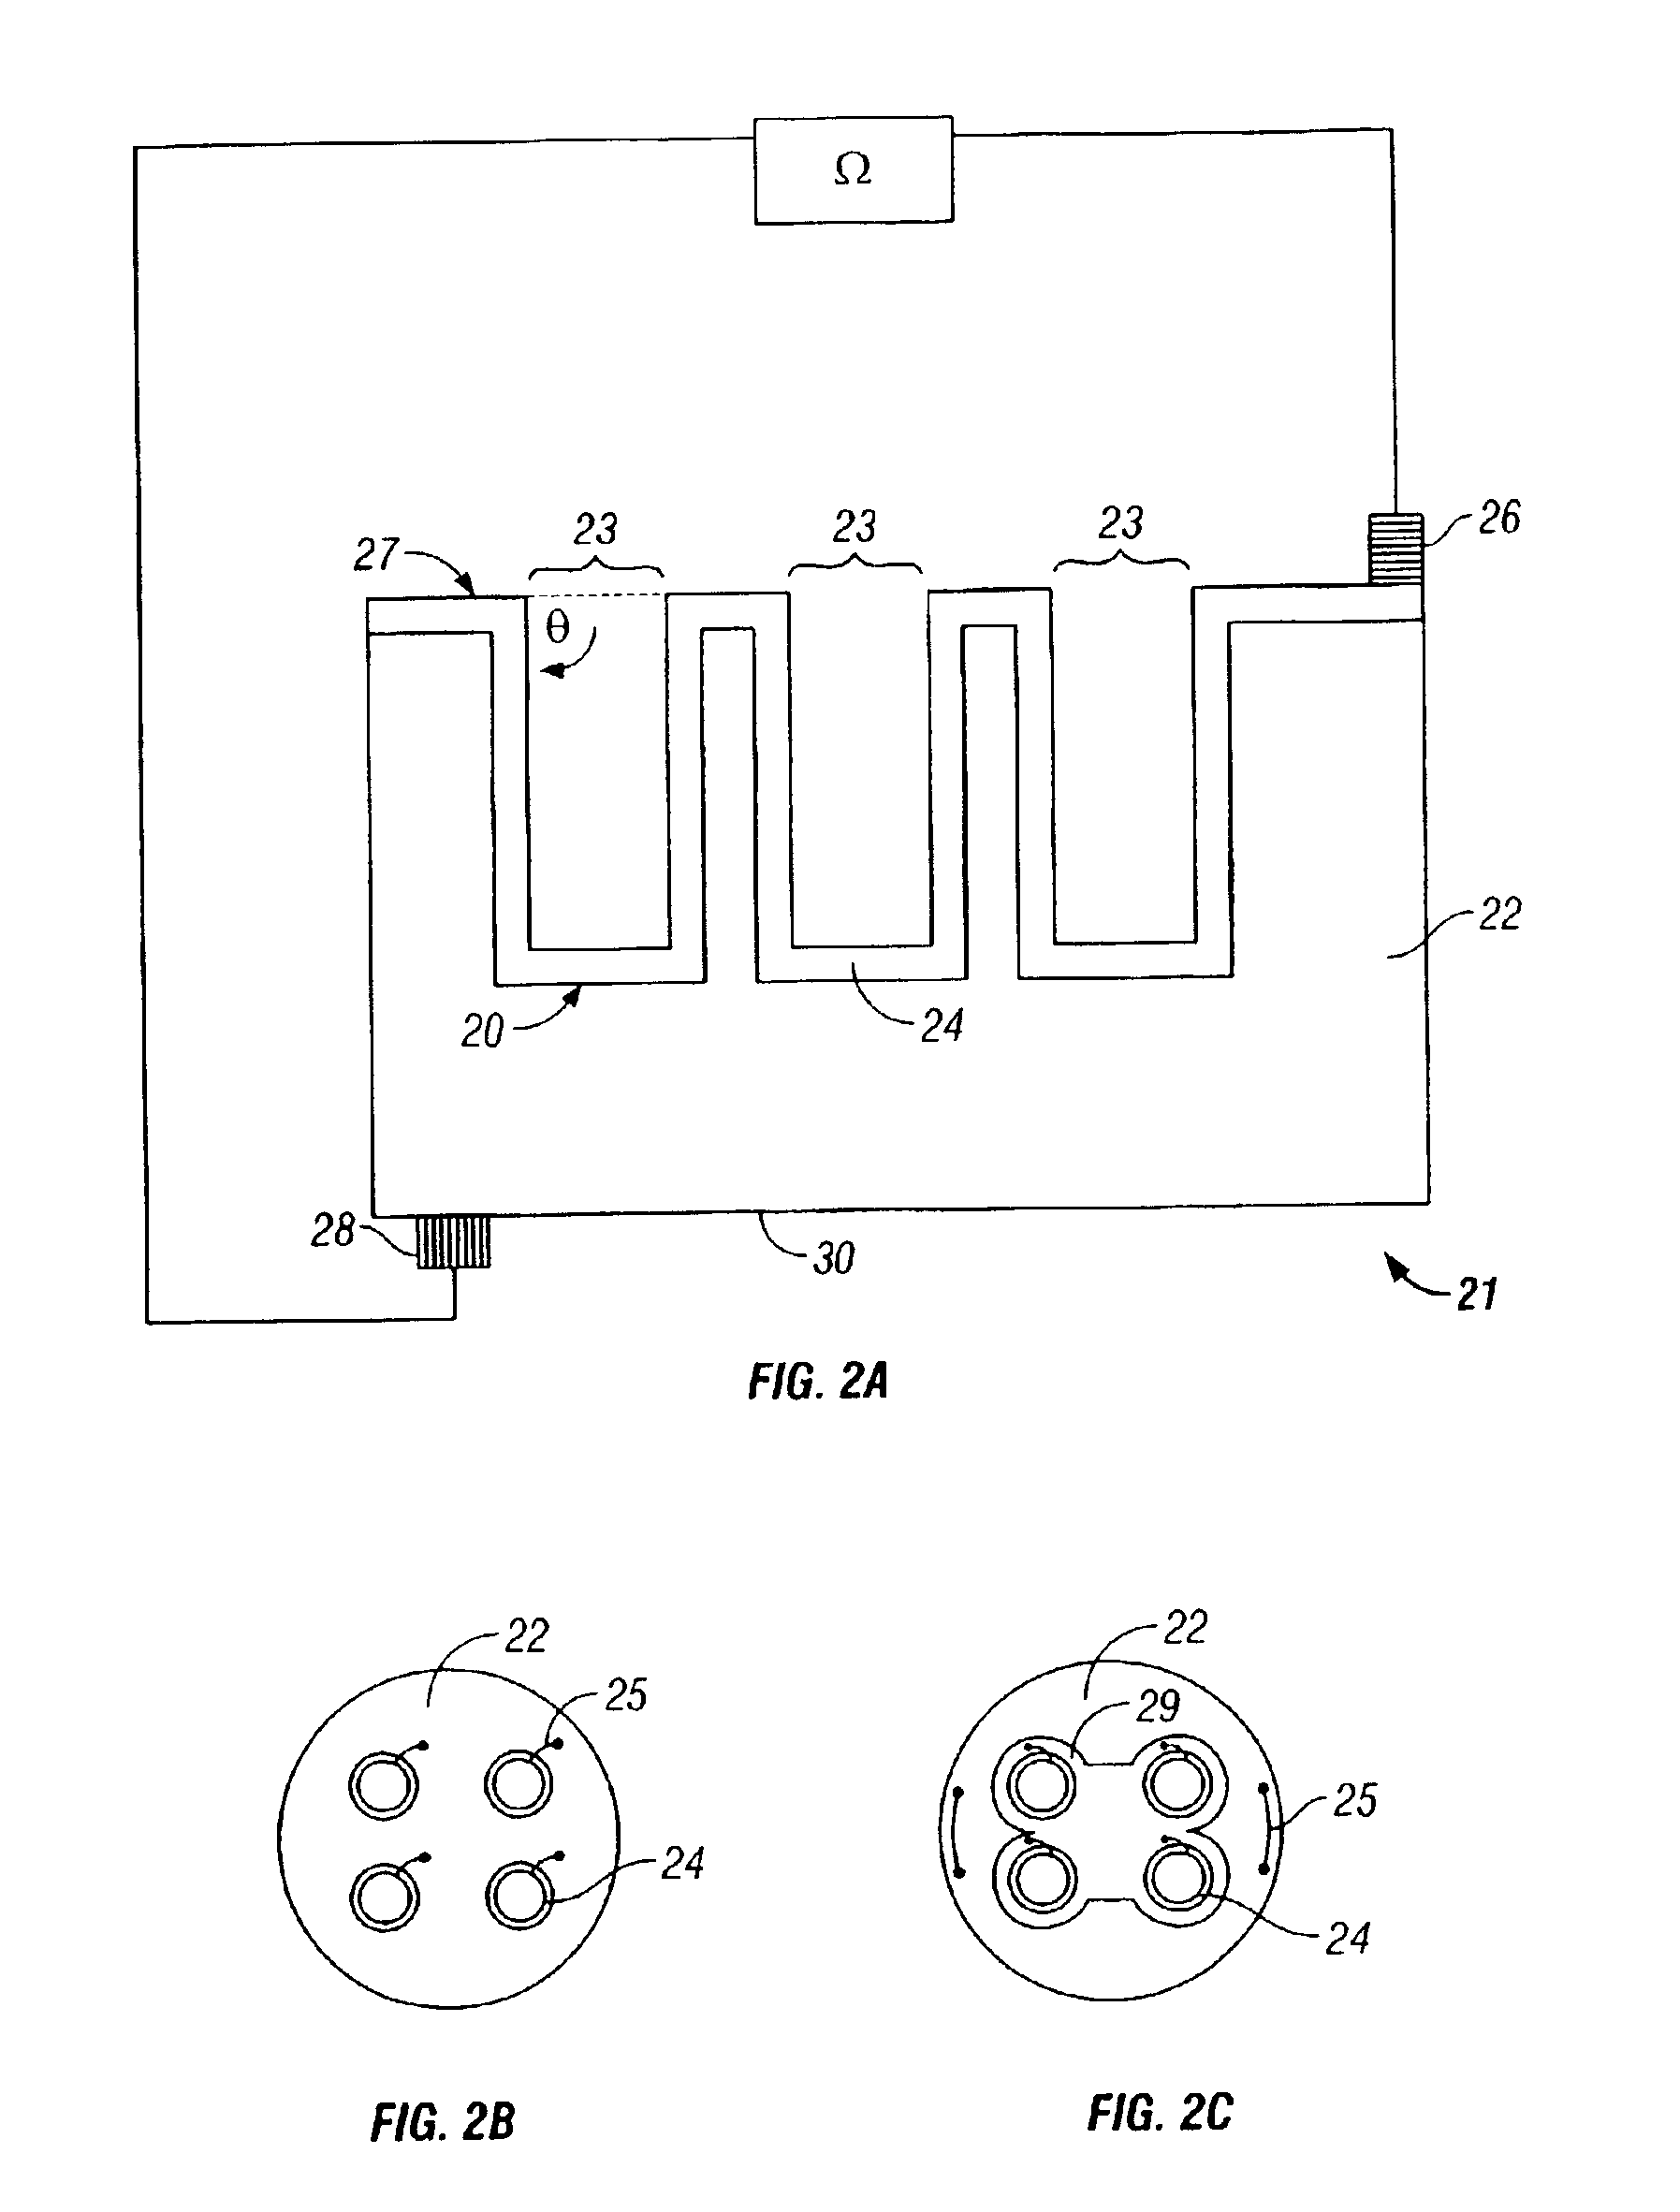 Apparatus and method for generating electrical current from the nuclear decay process of a radioactive material